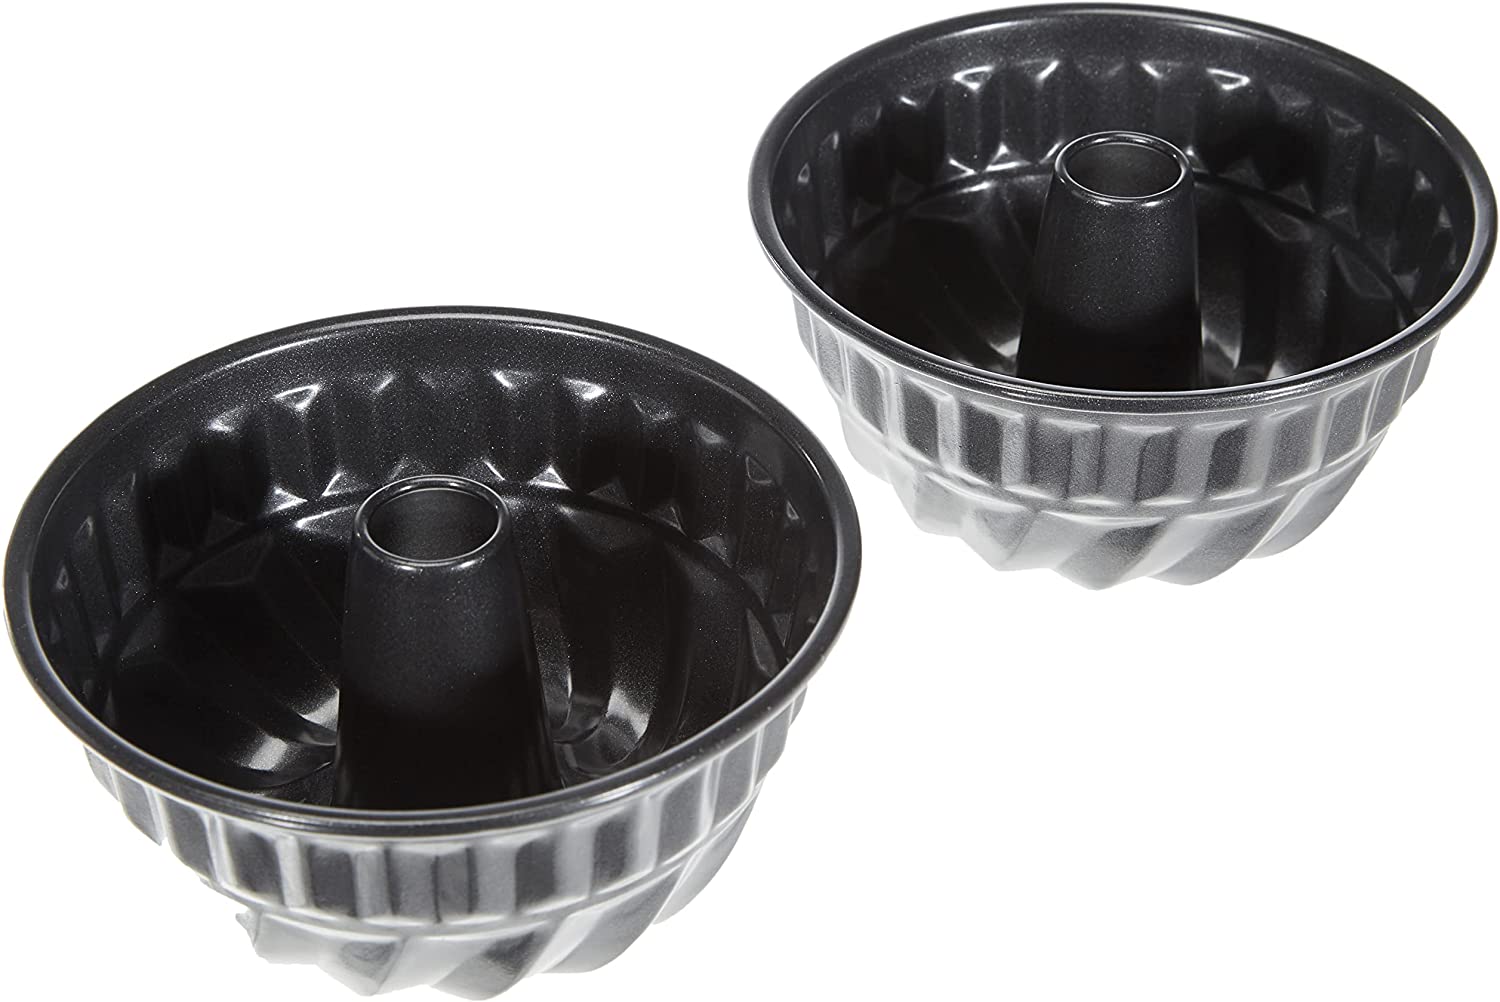 Staedter Städter 822122 Mini Cake Tins Pack of 2 with Non-Stick Coating Height 4.5 cm